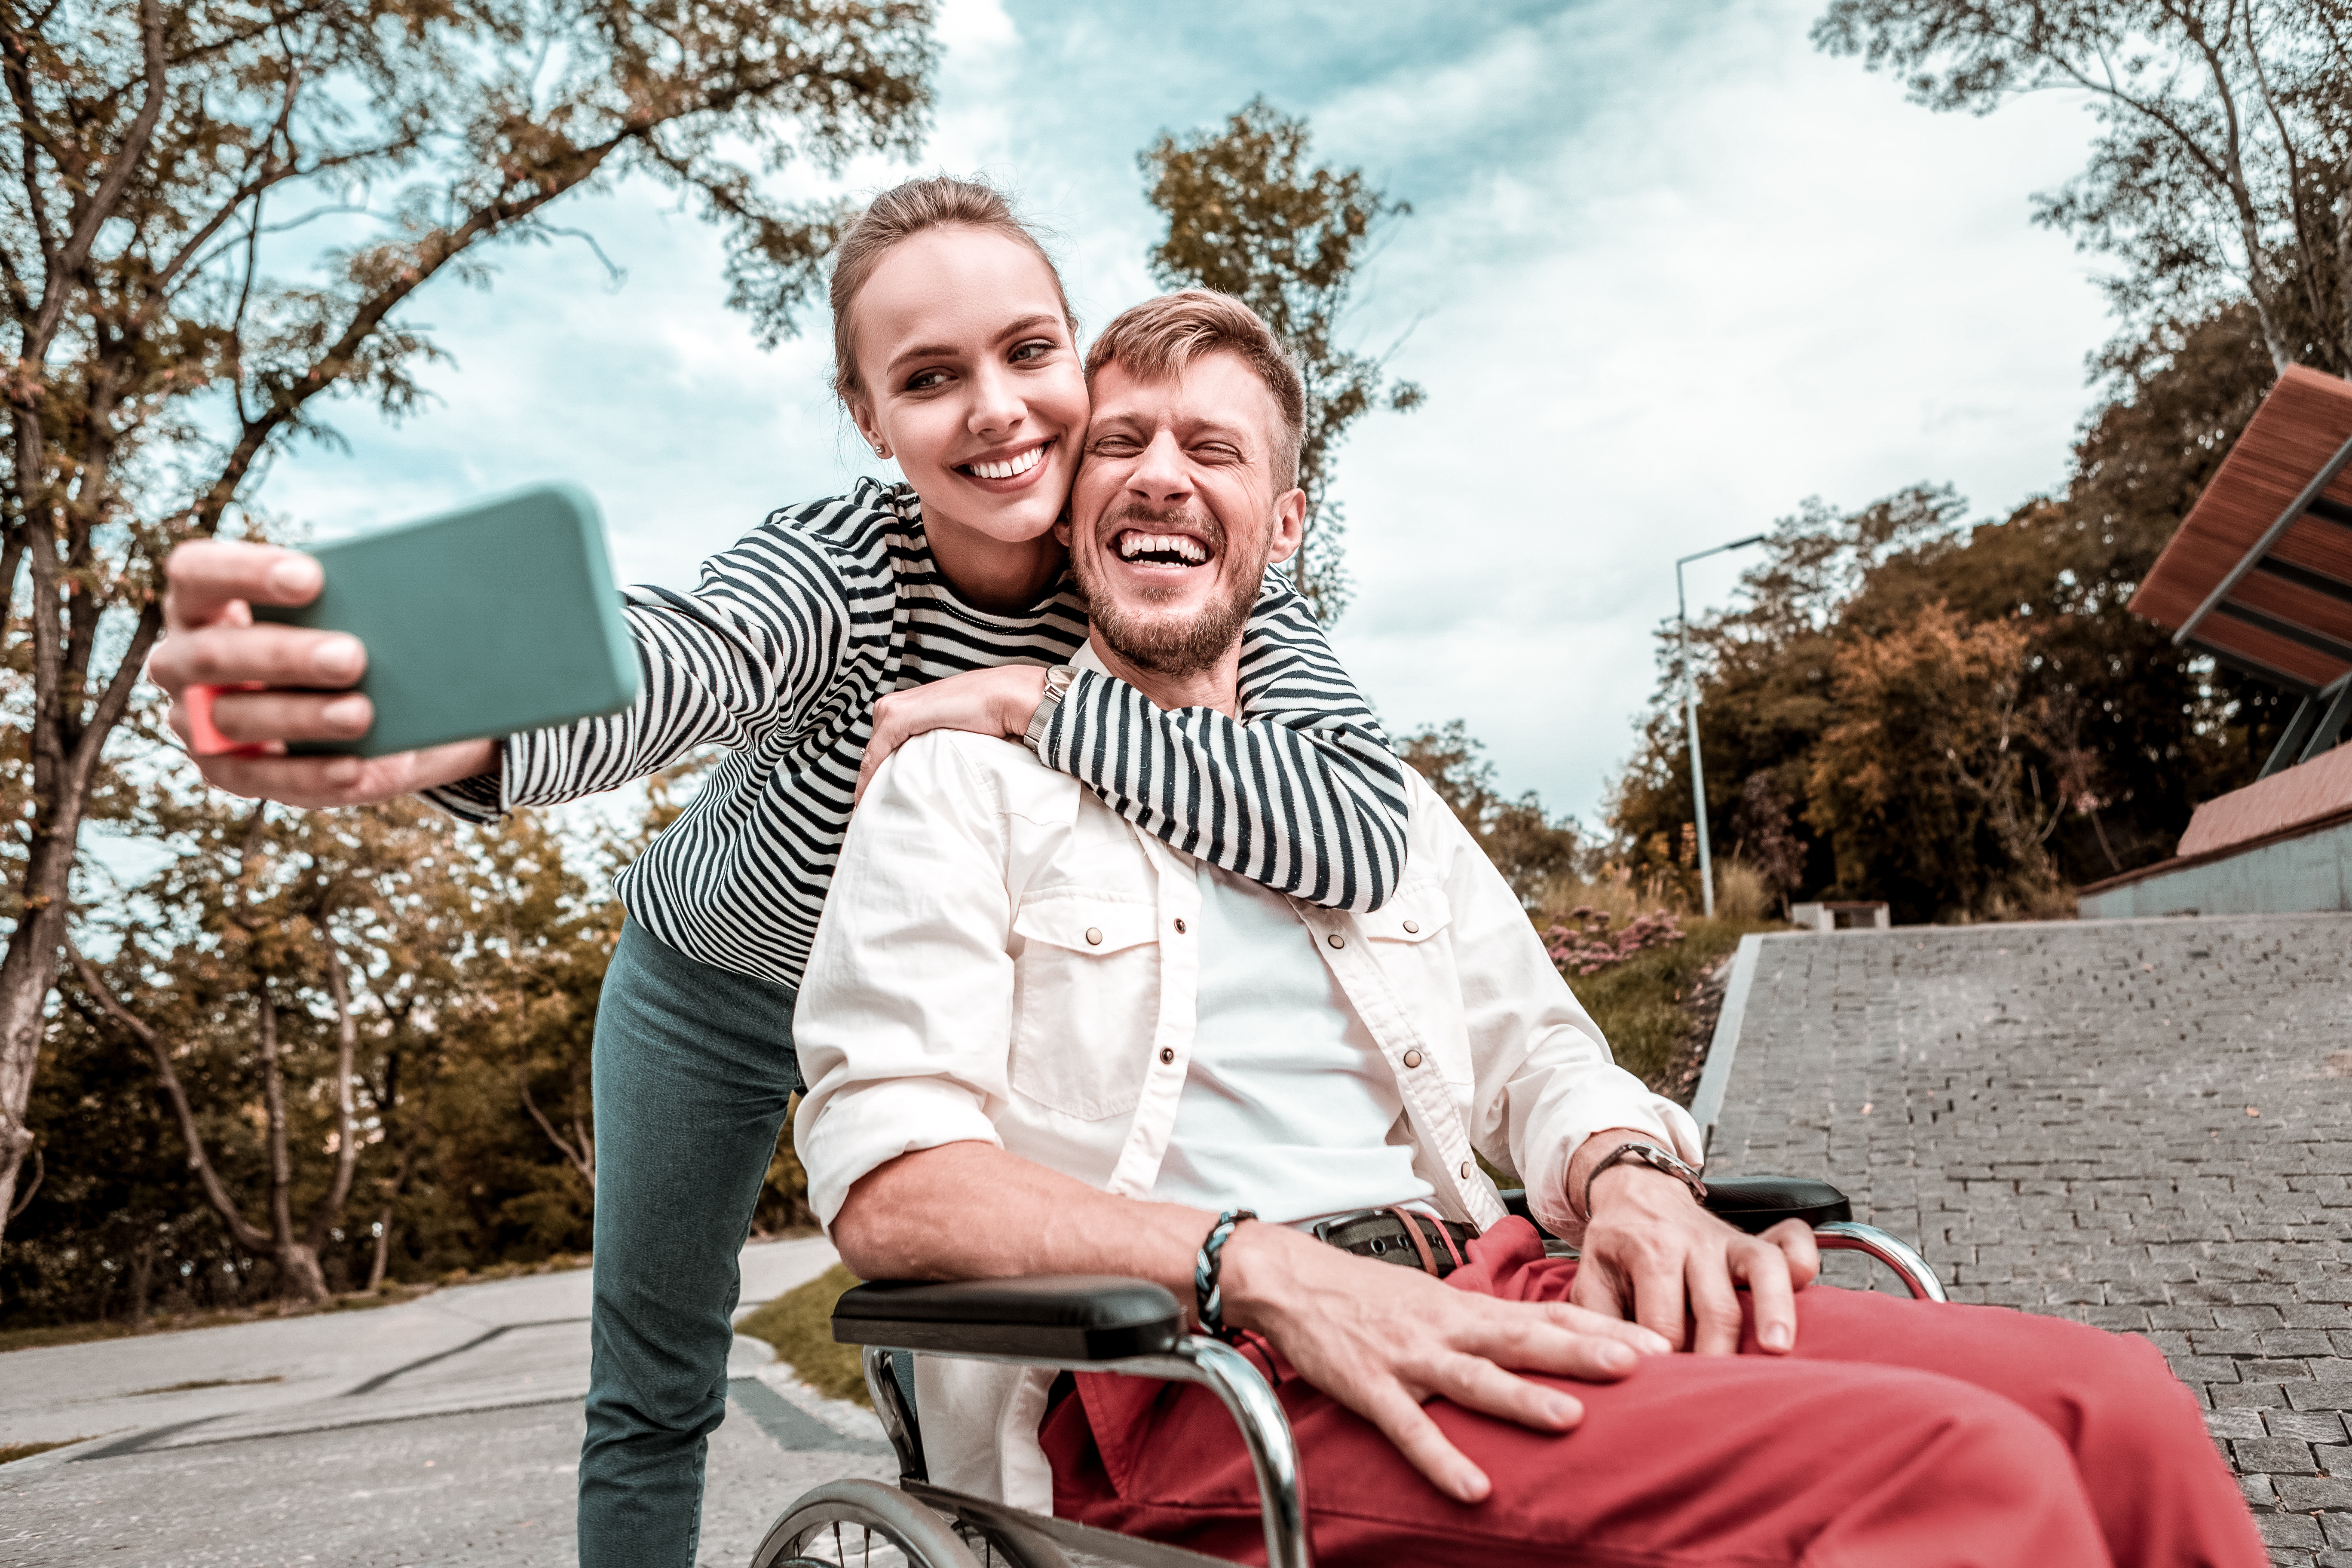 a woman holds up a mobile phone taking a selfie of herself and the man she is with in a wheelchair.